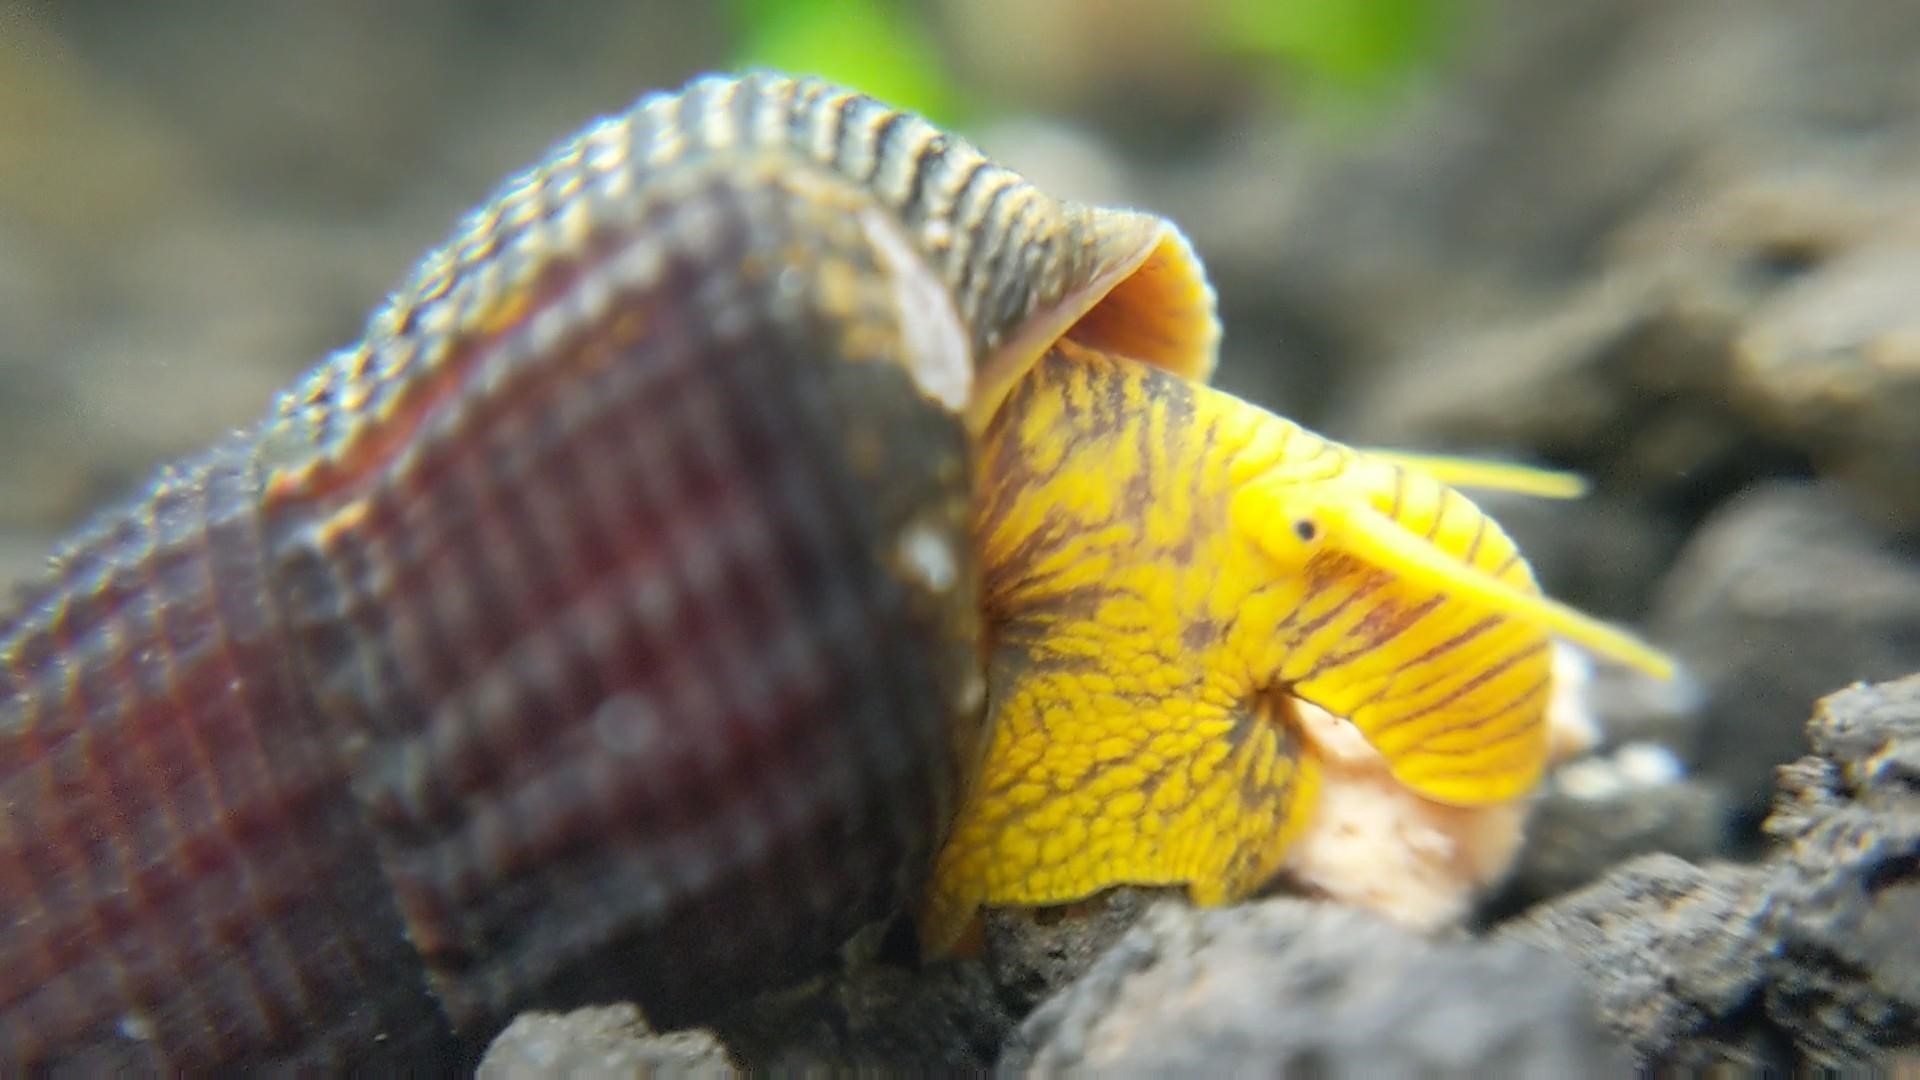 close up yellow rabbit snail picture in an aquarium